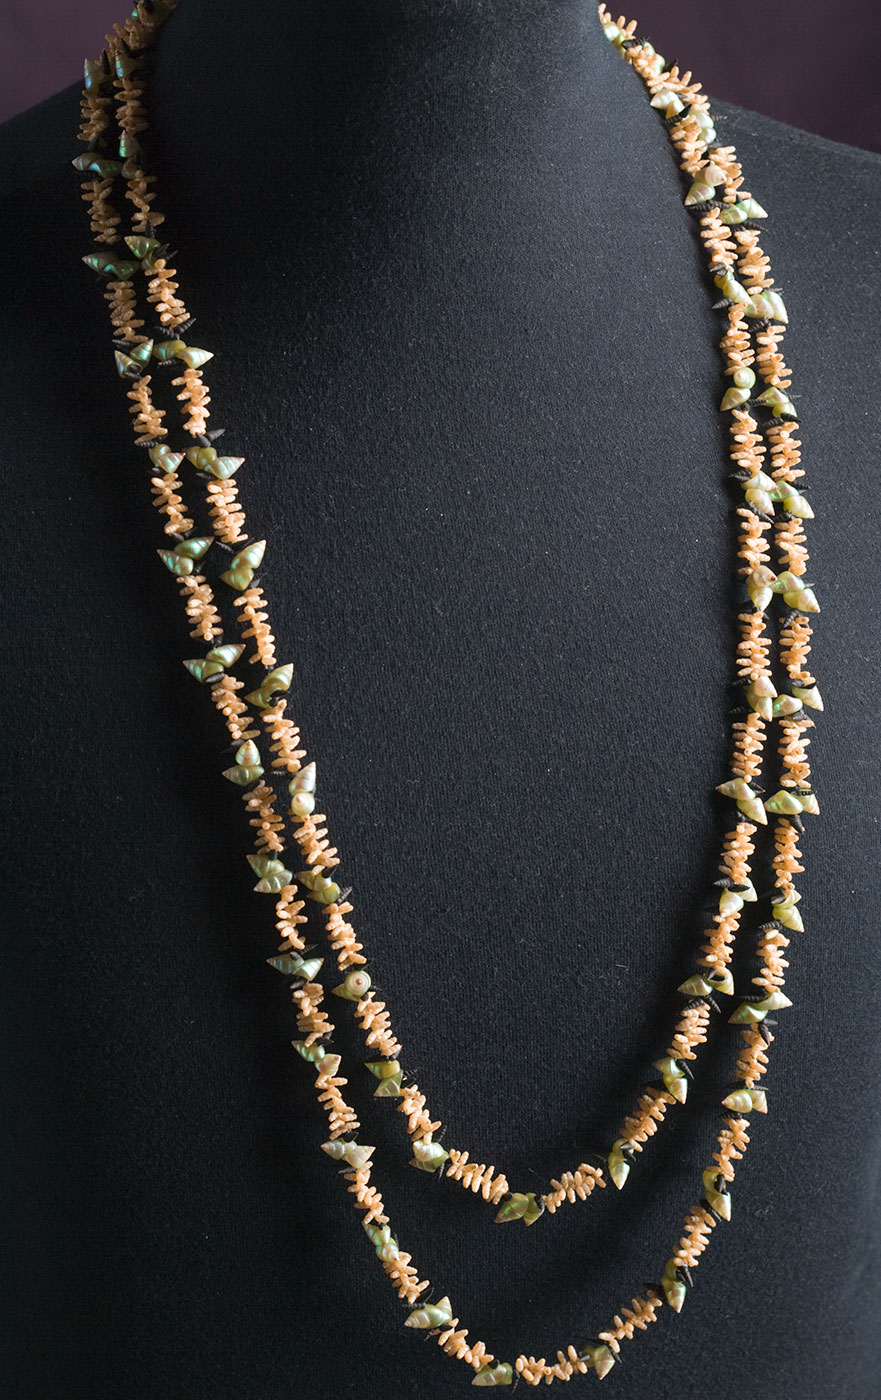 A necklace made from sea shells displayed on a dressmaker's dummy. - click to view larger image